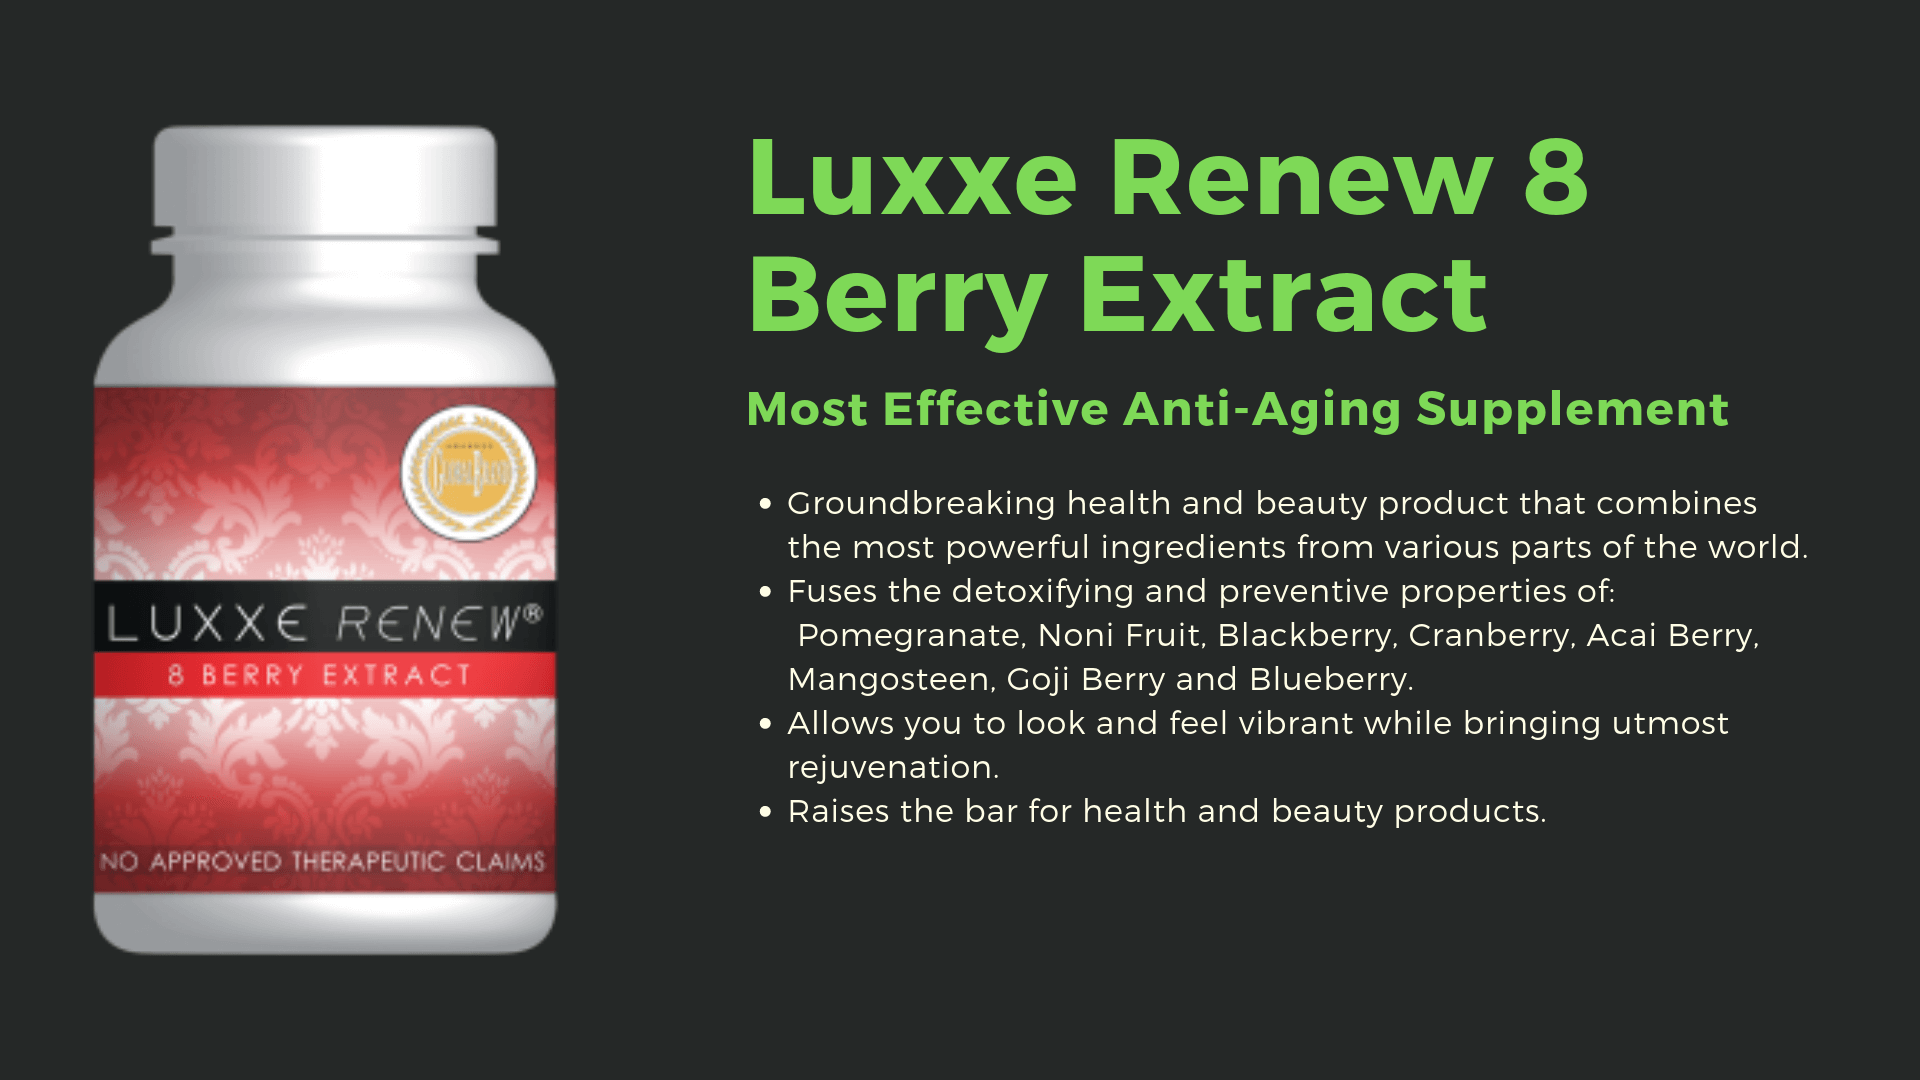 luxxe renew 8 berry extract image details